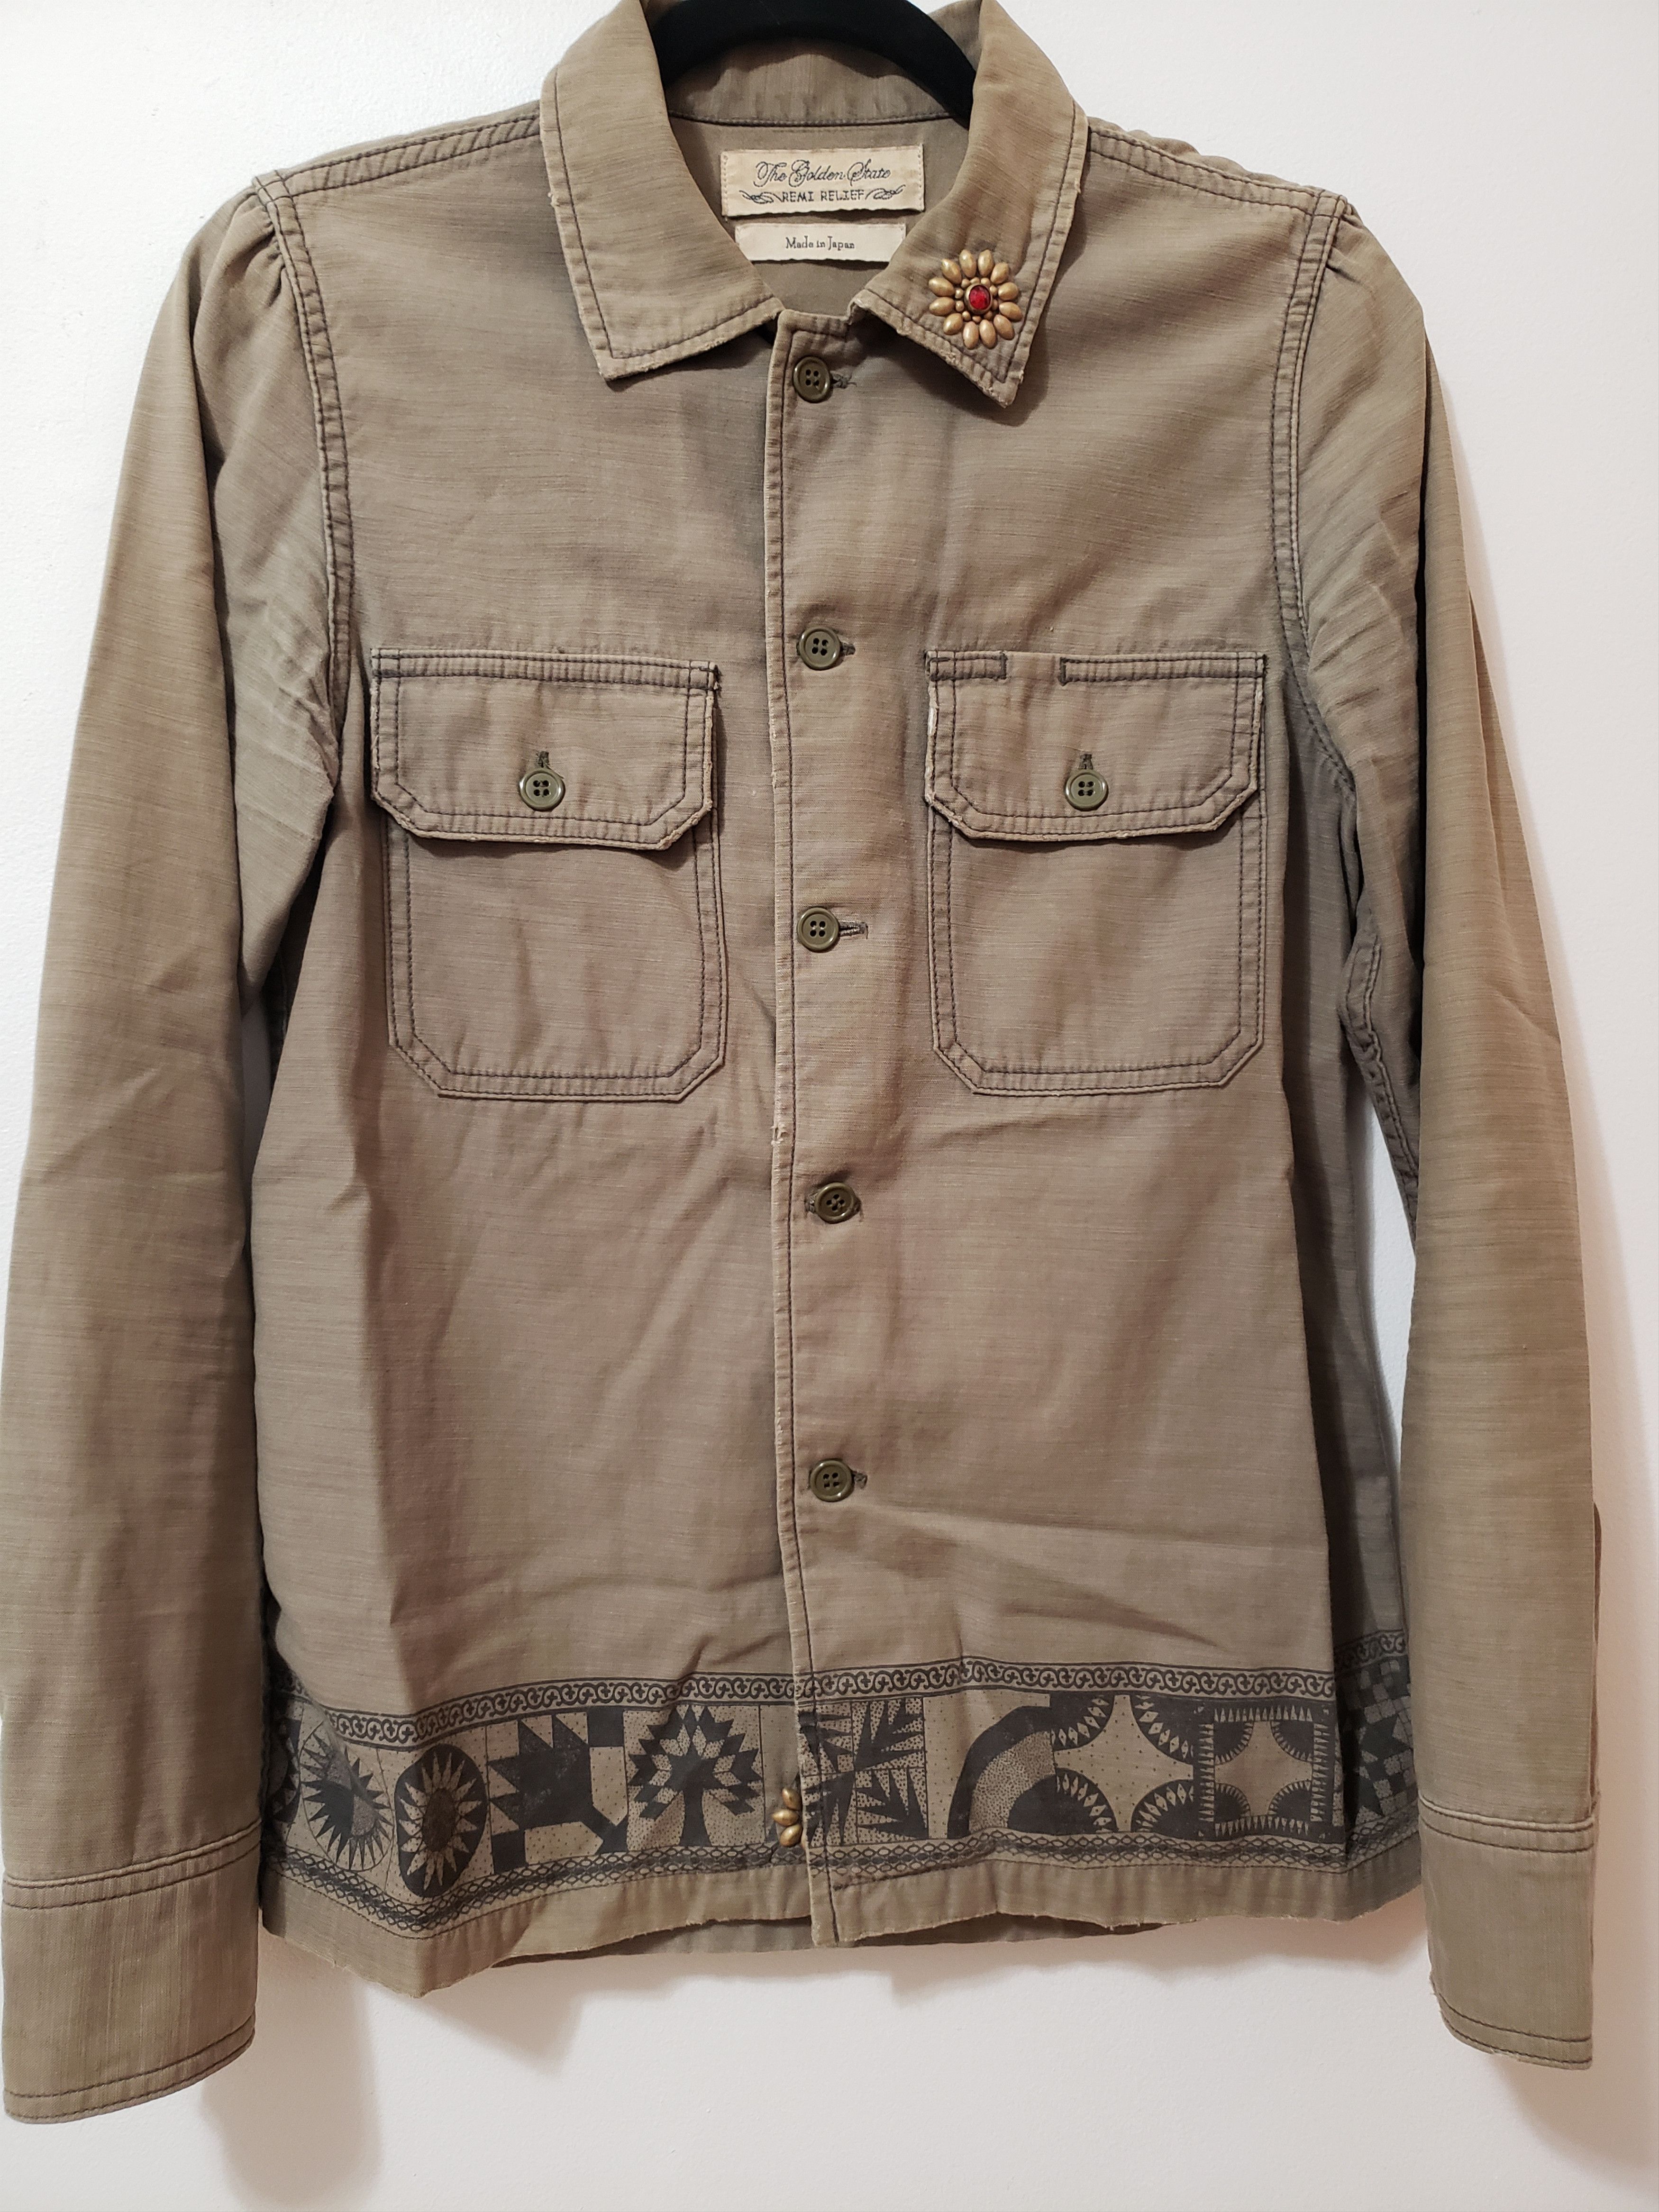 Remi Relief Remi Relief Embroidered Military Shirt - Olive | Grailed